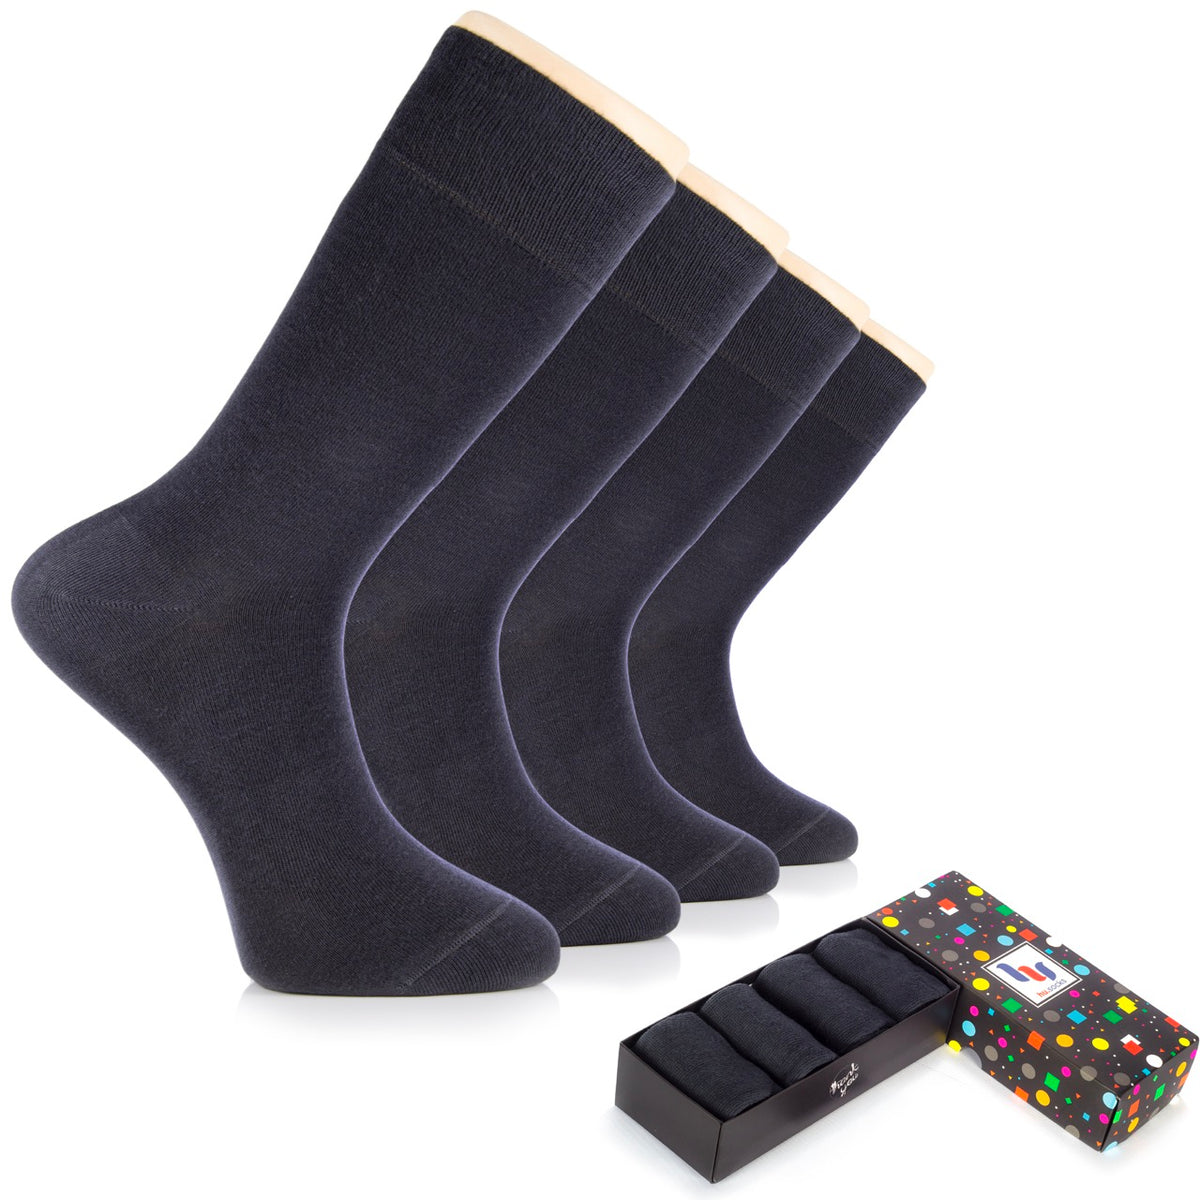 Men's Cotton Dress Seamless Toe Business Crew Socks with Gift Box, 4 Pairs